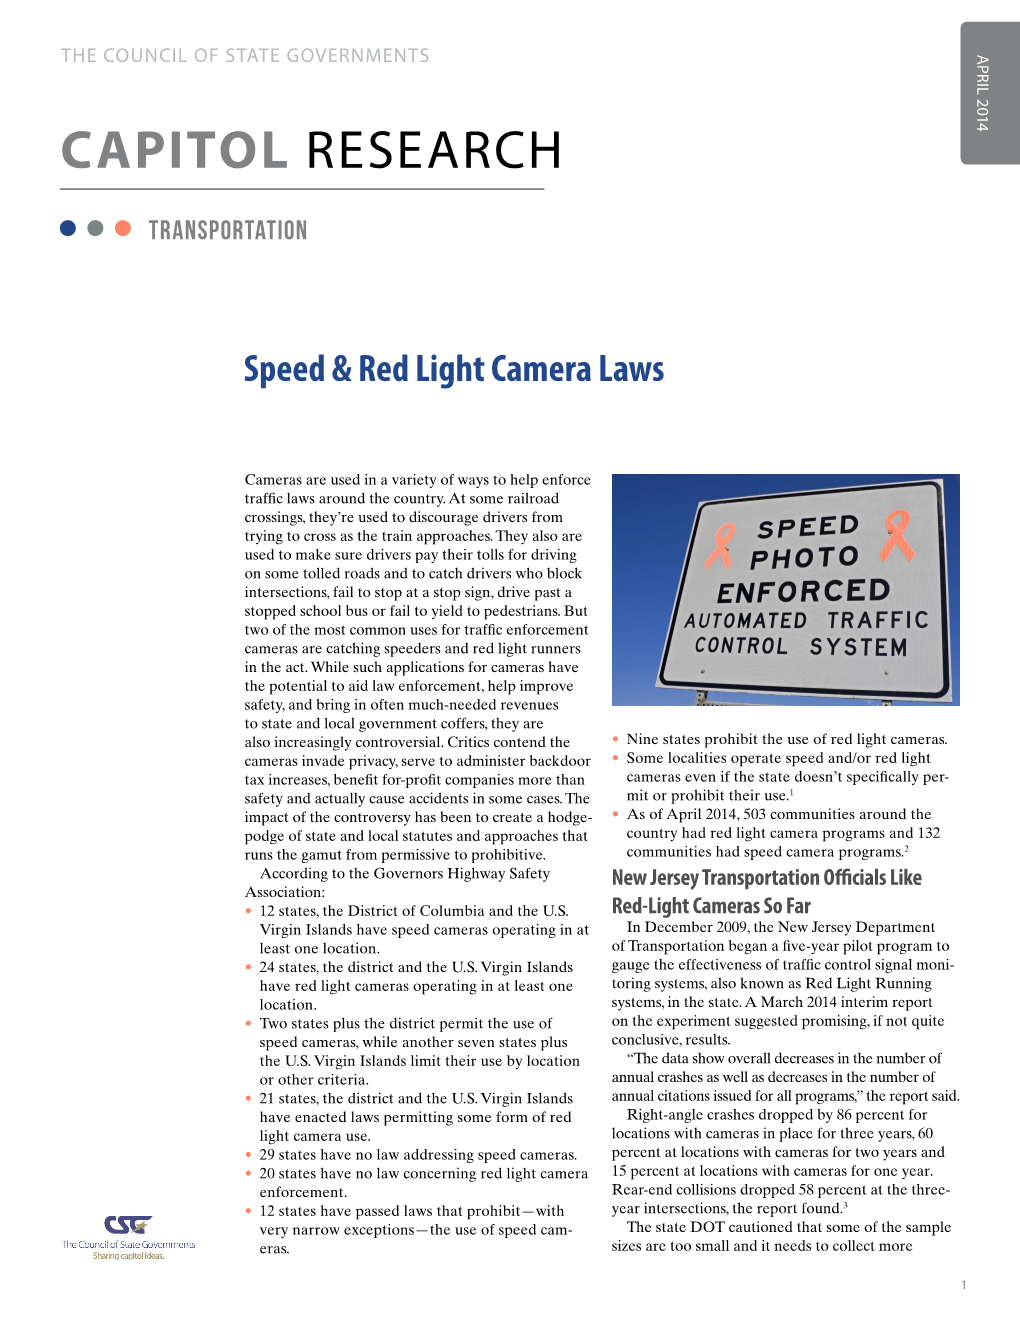 Speed and Red Light Camera Laws.” April 2014